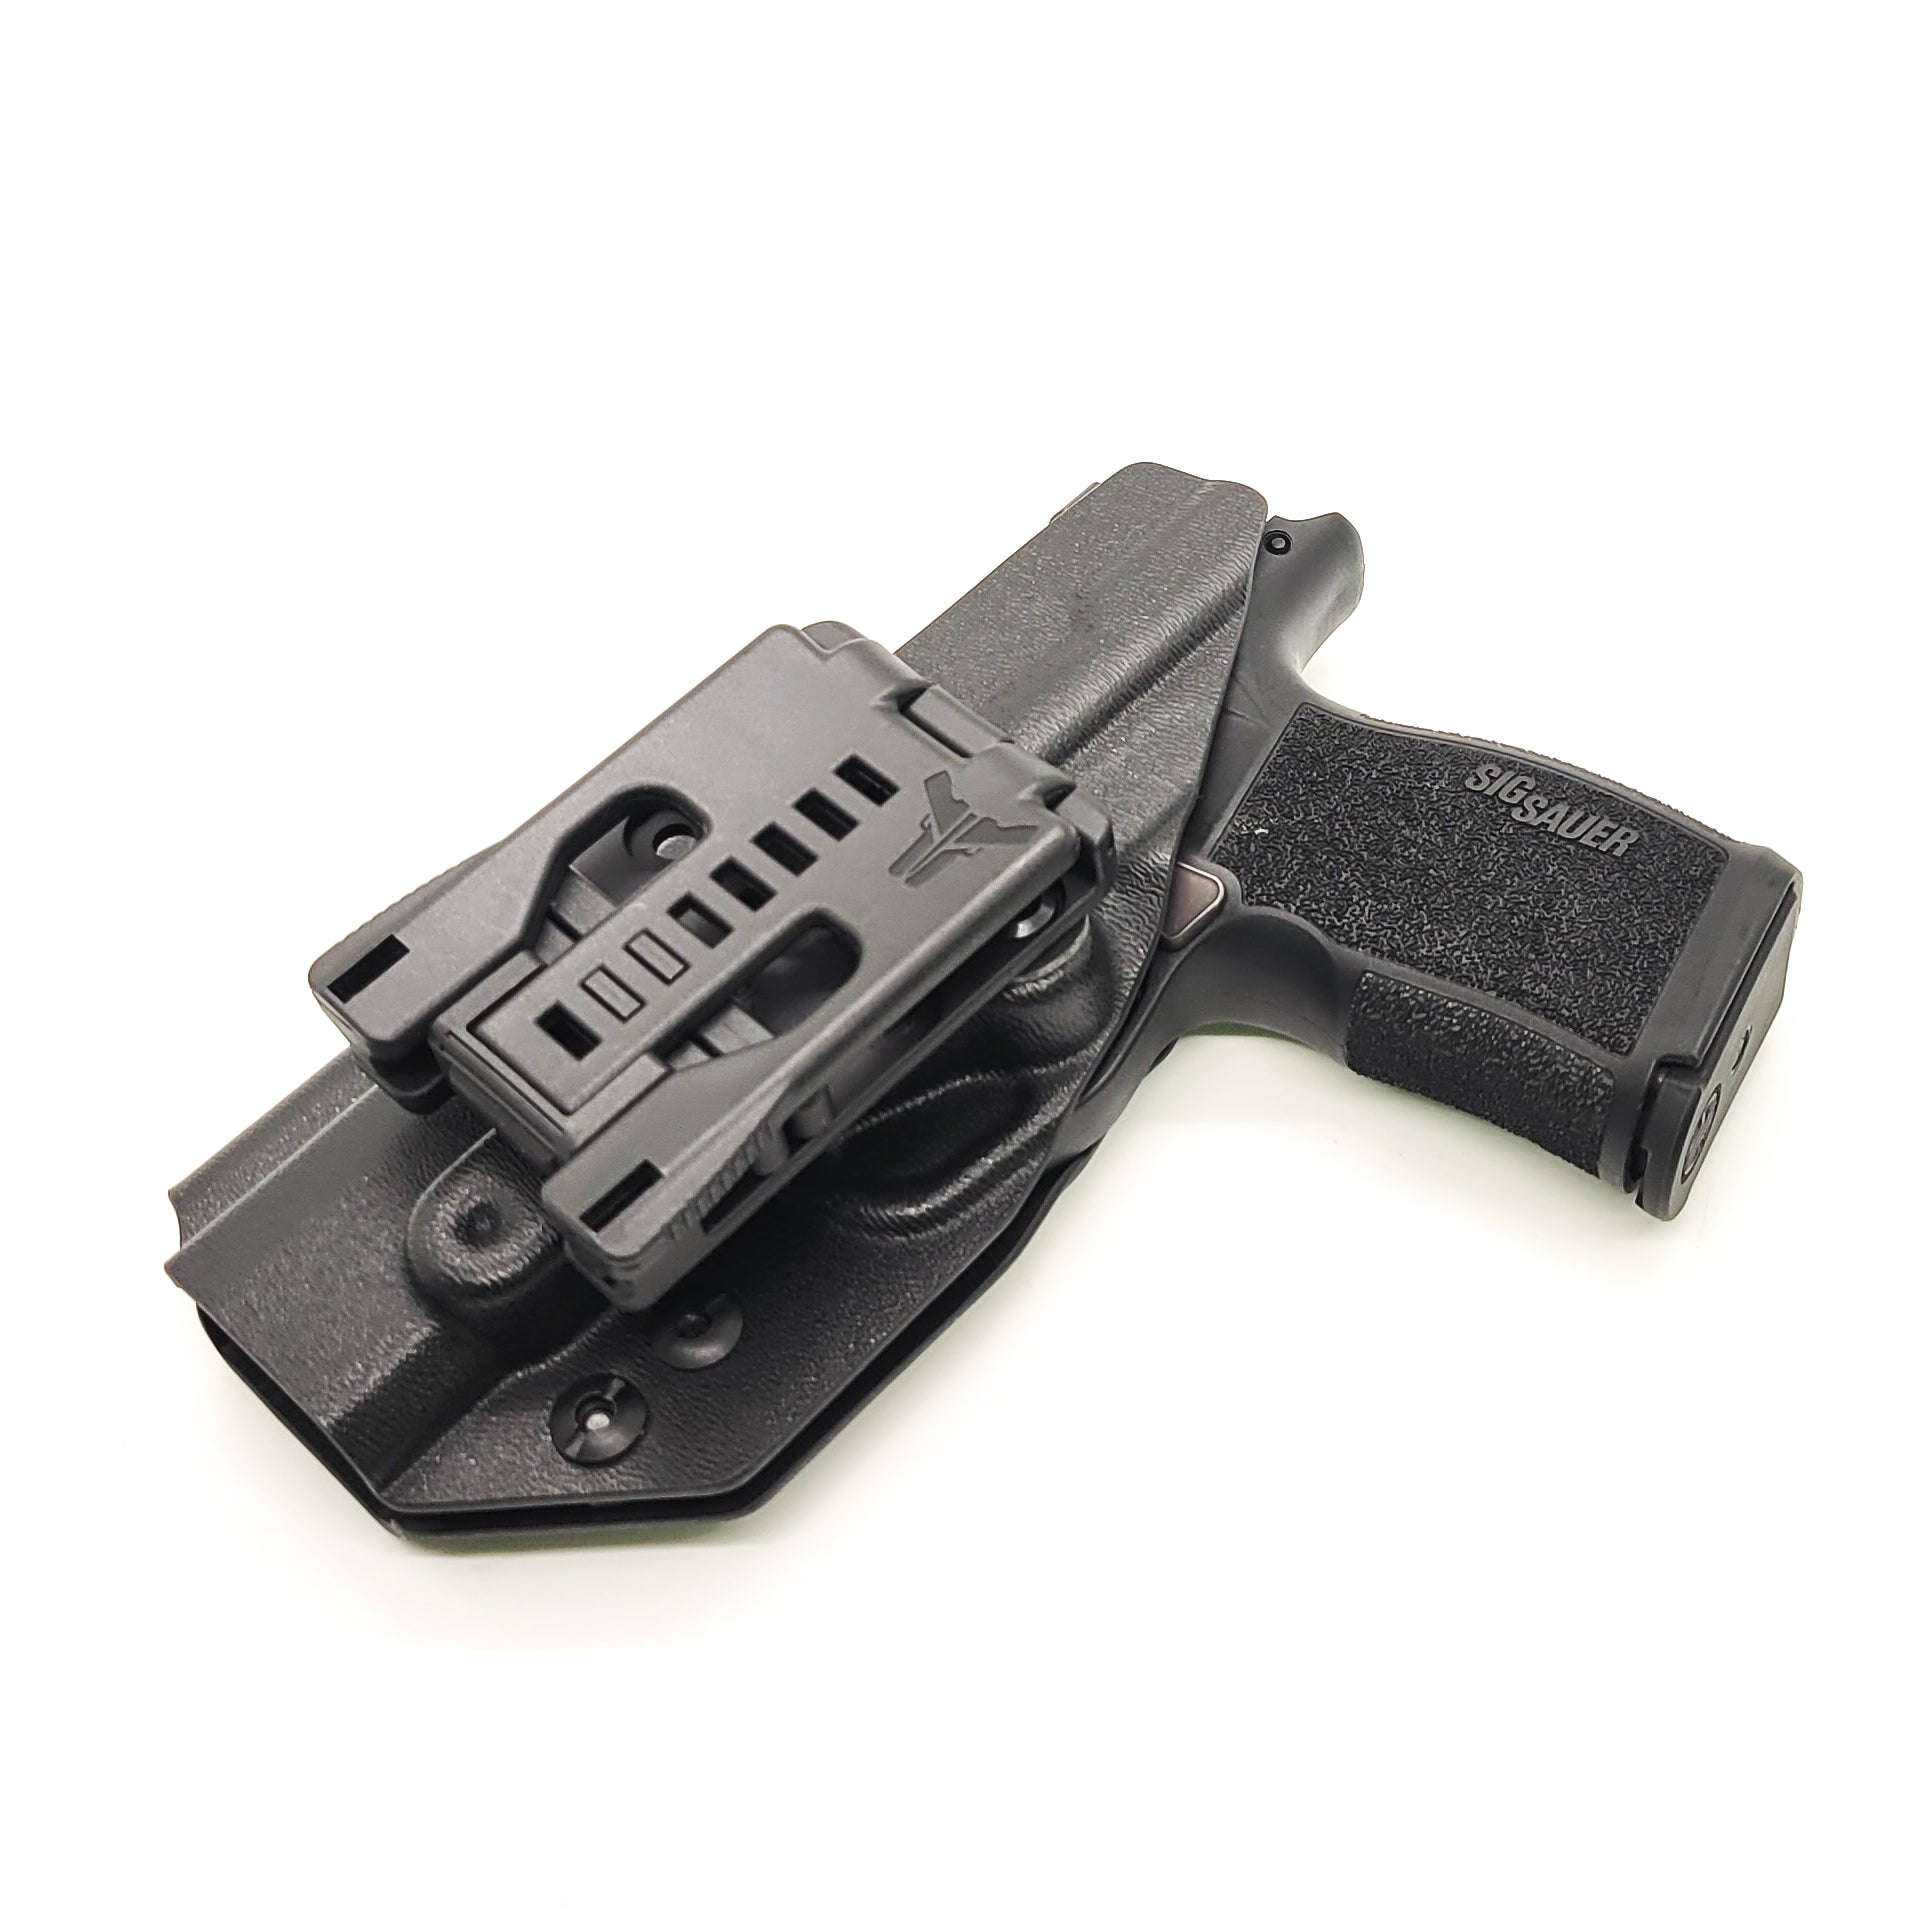 For the best, most comfortable, easily concealed, Outside Waistband OWB Kydex Holster that is designed to fit the Sig Sauer P365, P365X, and P365XL handgun, shop Four Brothers Holsters. Full sweat guard, adjustable retention. Open muzzle for threaded barrels, cleared for red dot sights. Made in USA P 365 X XL